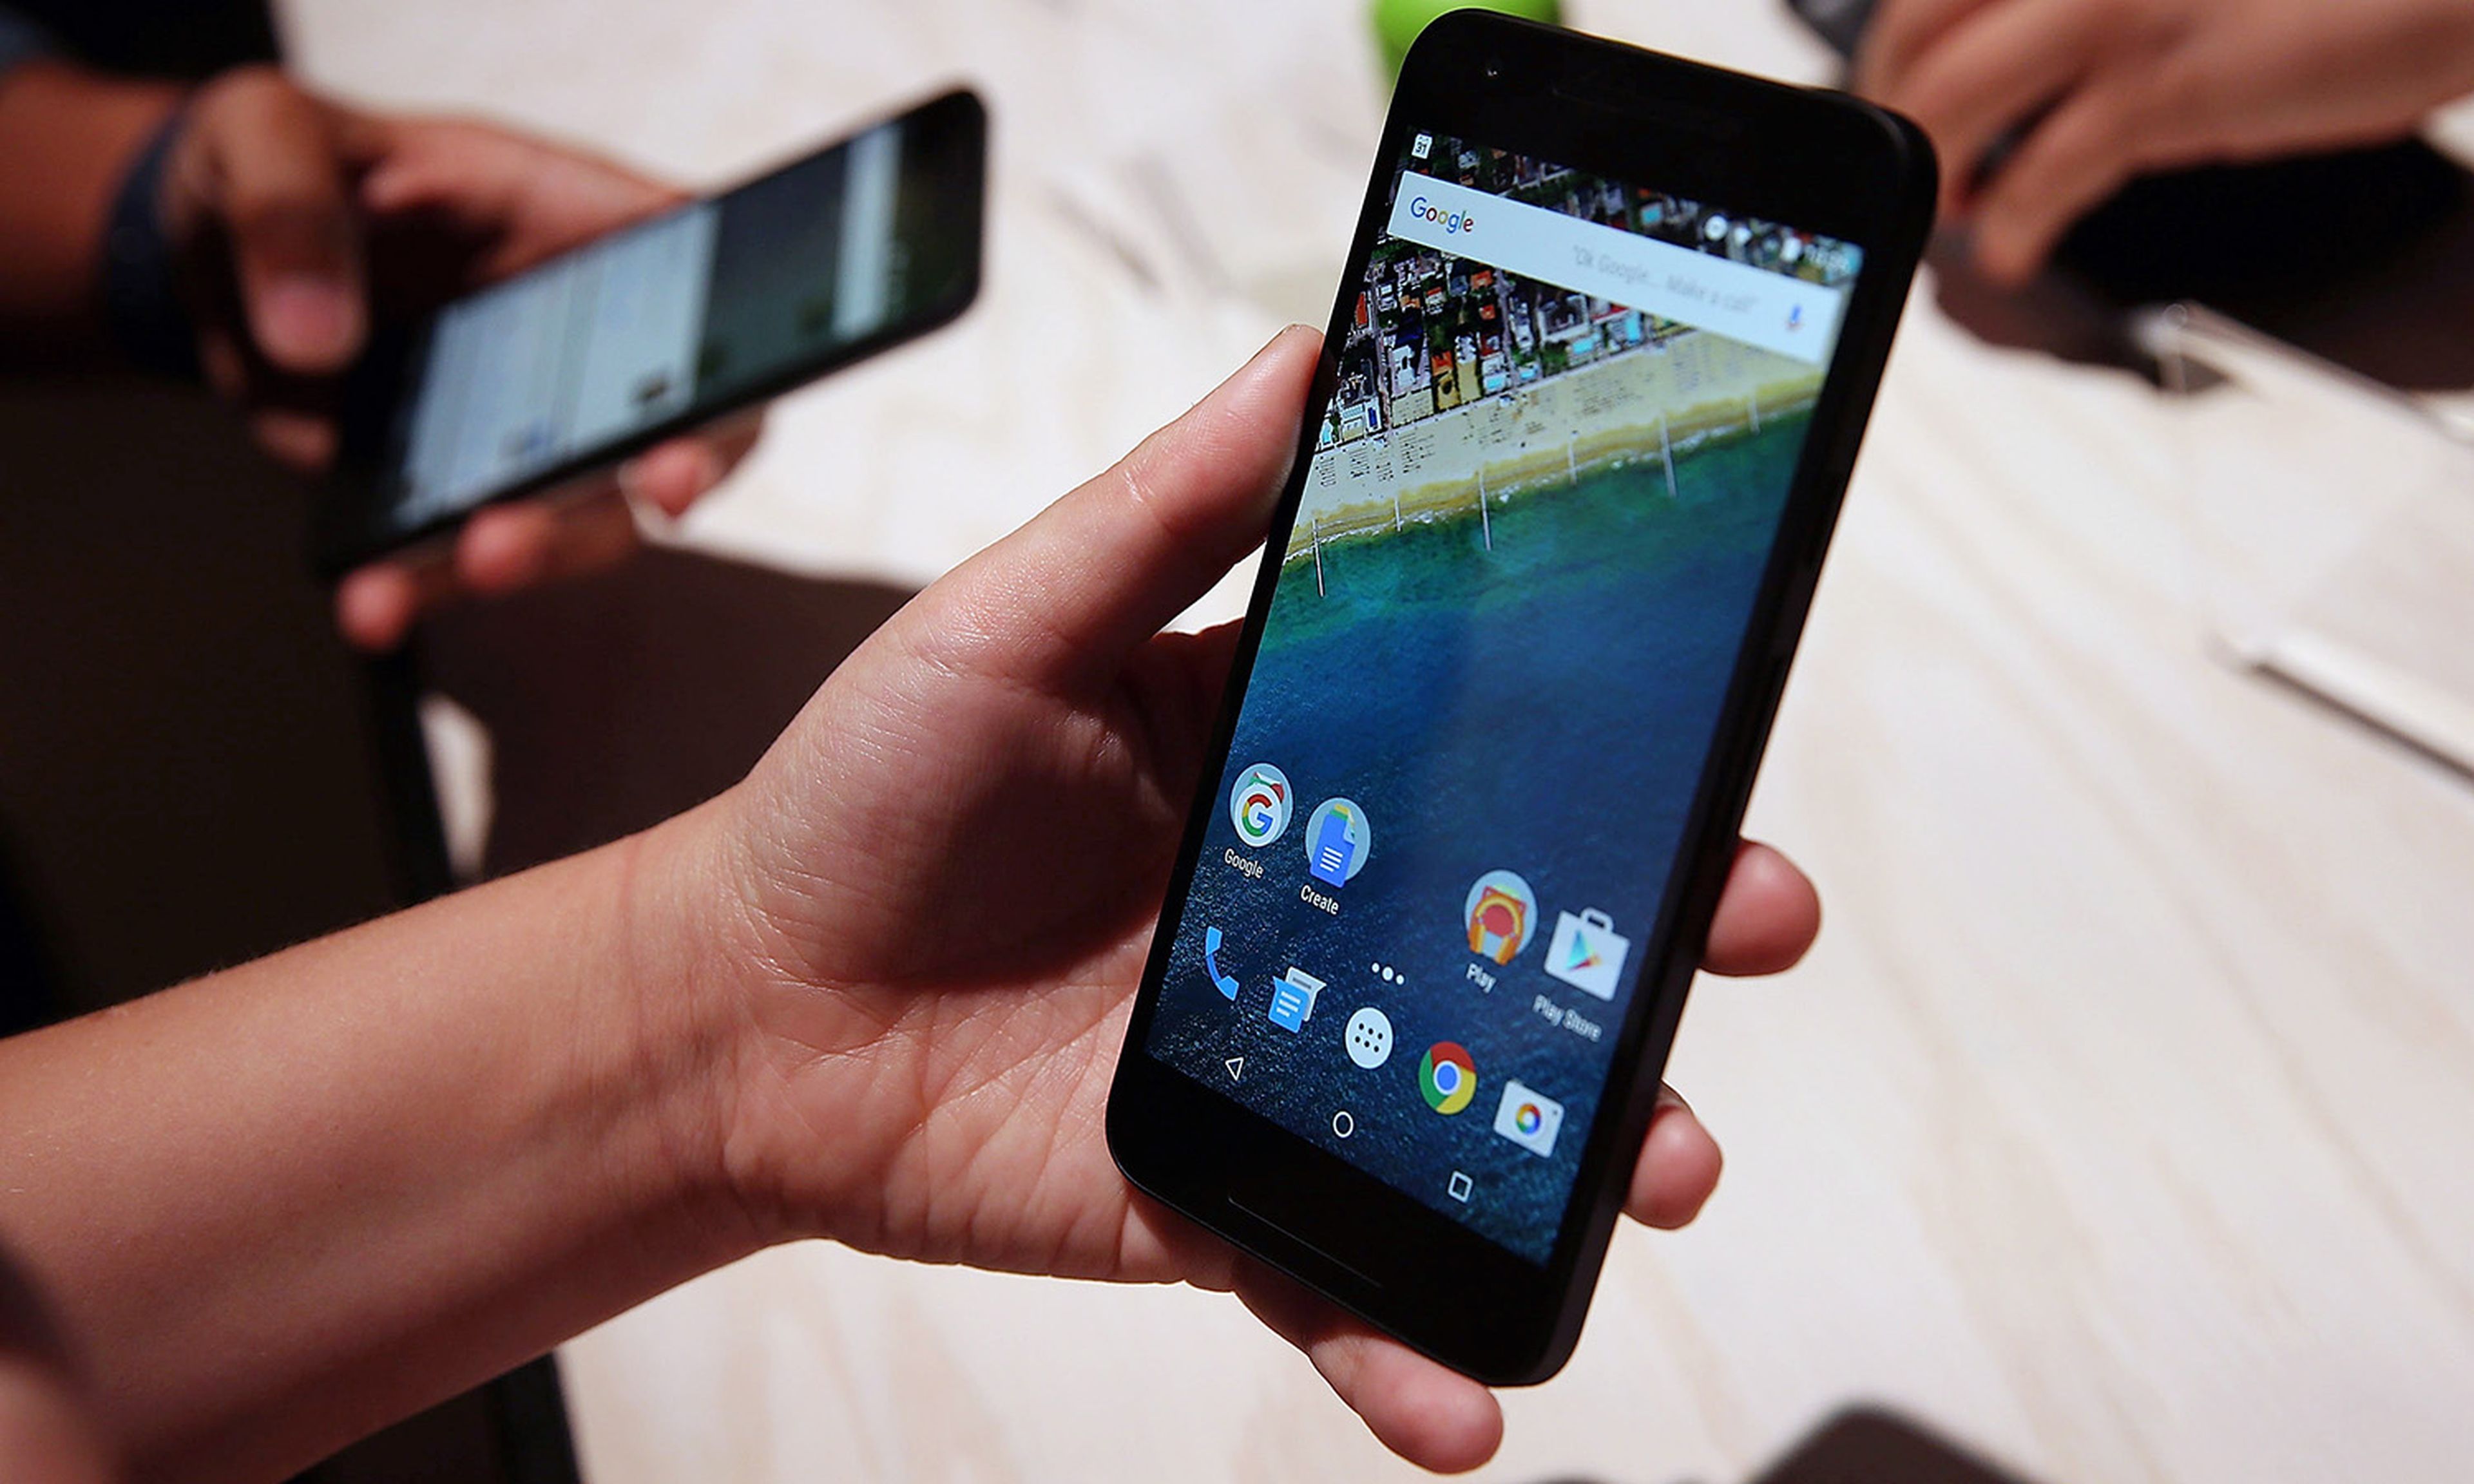 An attendee inspects a Nexus 5X phone during a Google media event on Sept. 29, 2015, in San Francisco. (Photo by Justin Sullivan/Getty Images)